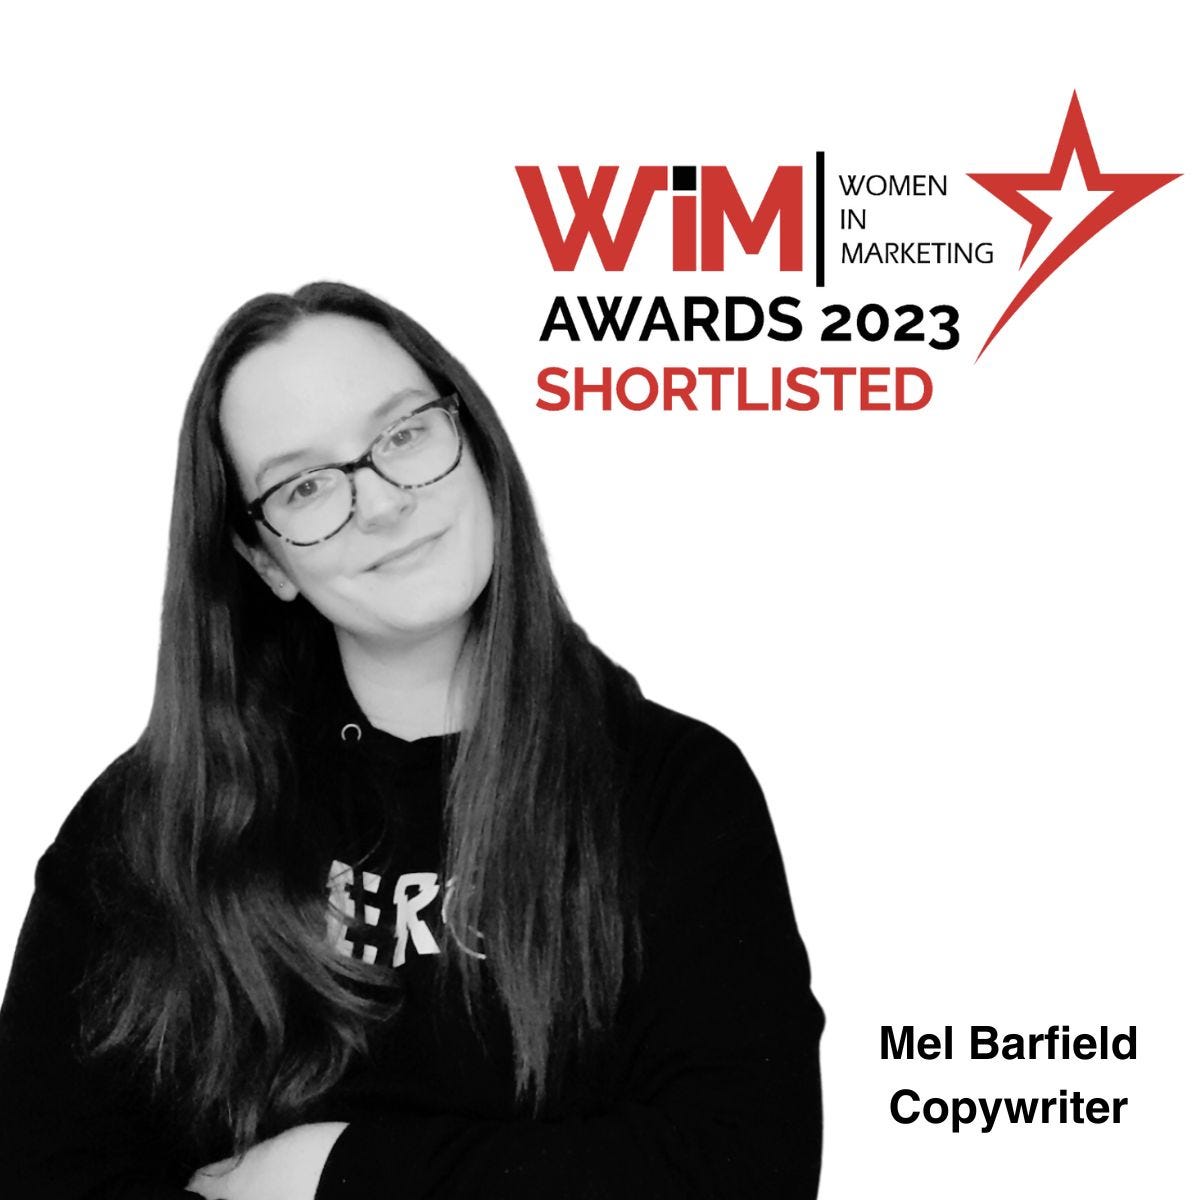 A white background with a black and white photo of Mel, a white woman with long dark hair and glasses.There's a red and black Women in Marketing Awards 2023 logo with "shortlisted" and "Mel Barfield Copywriter".